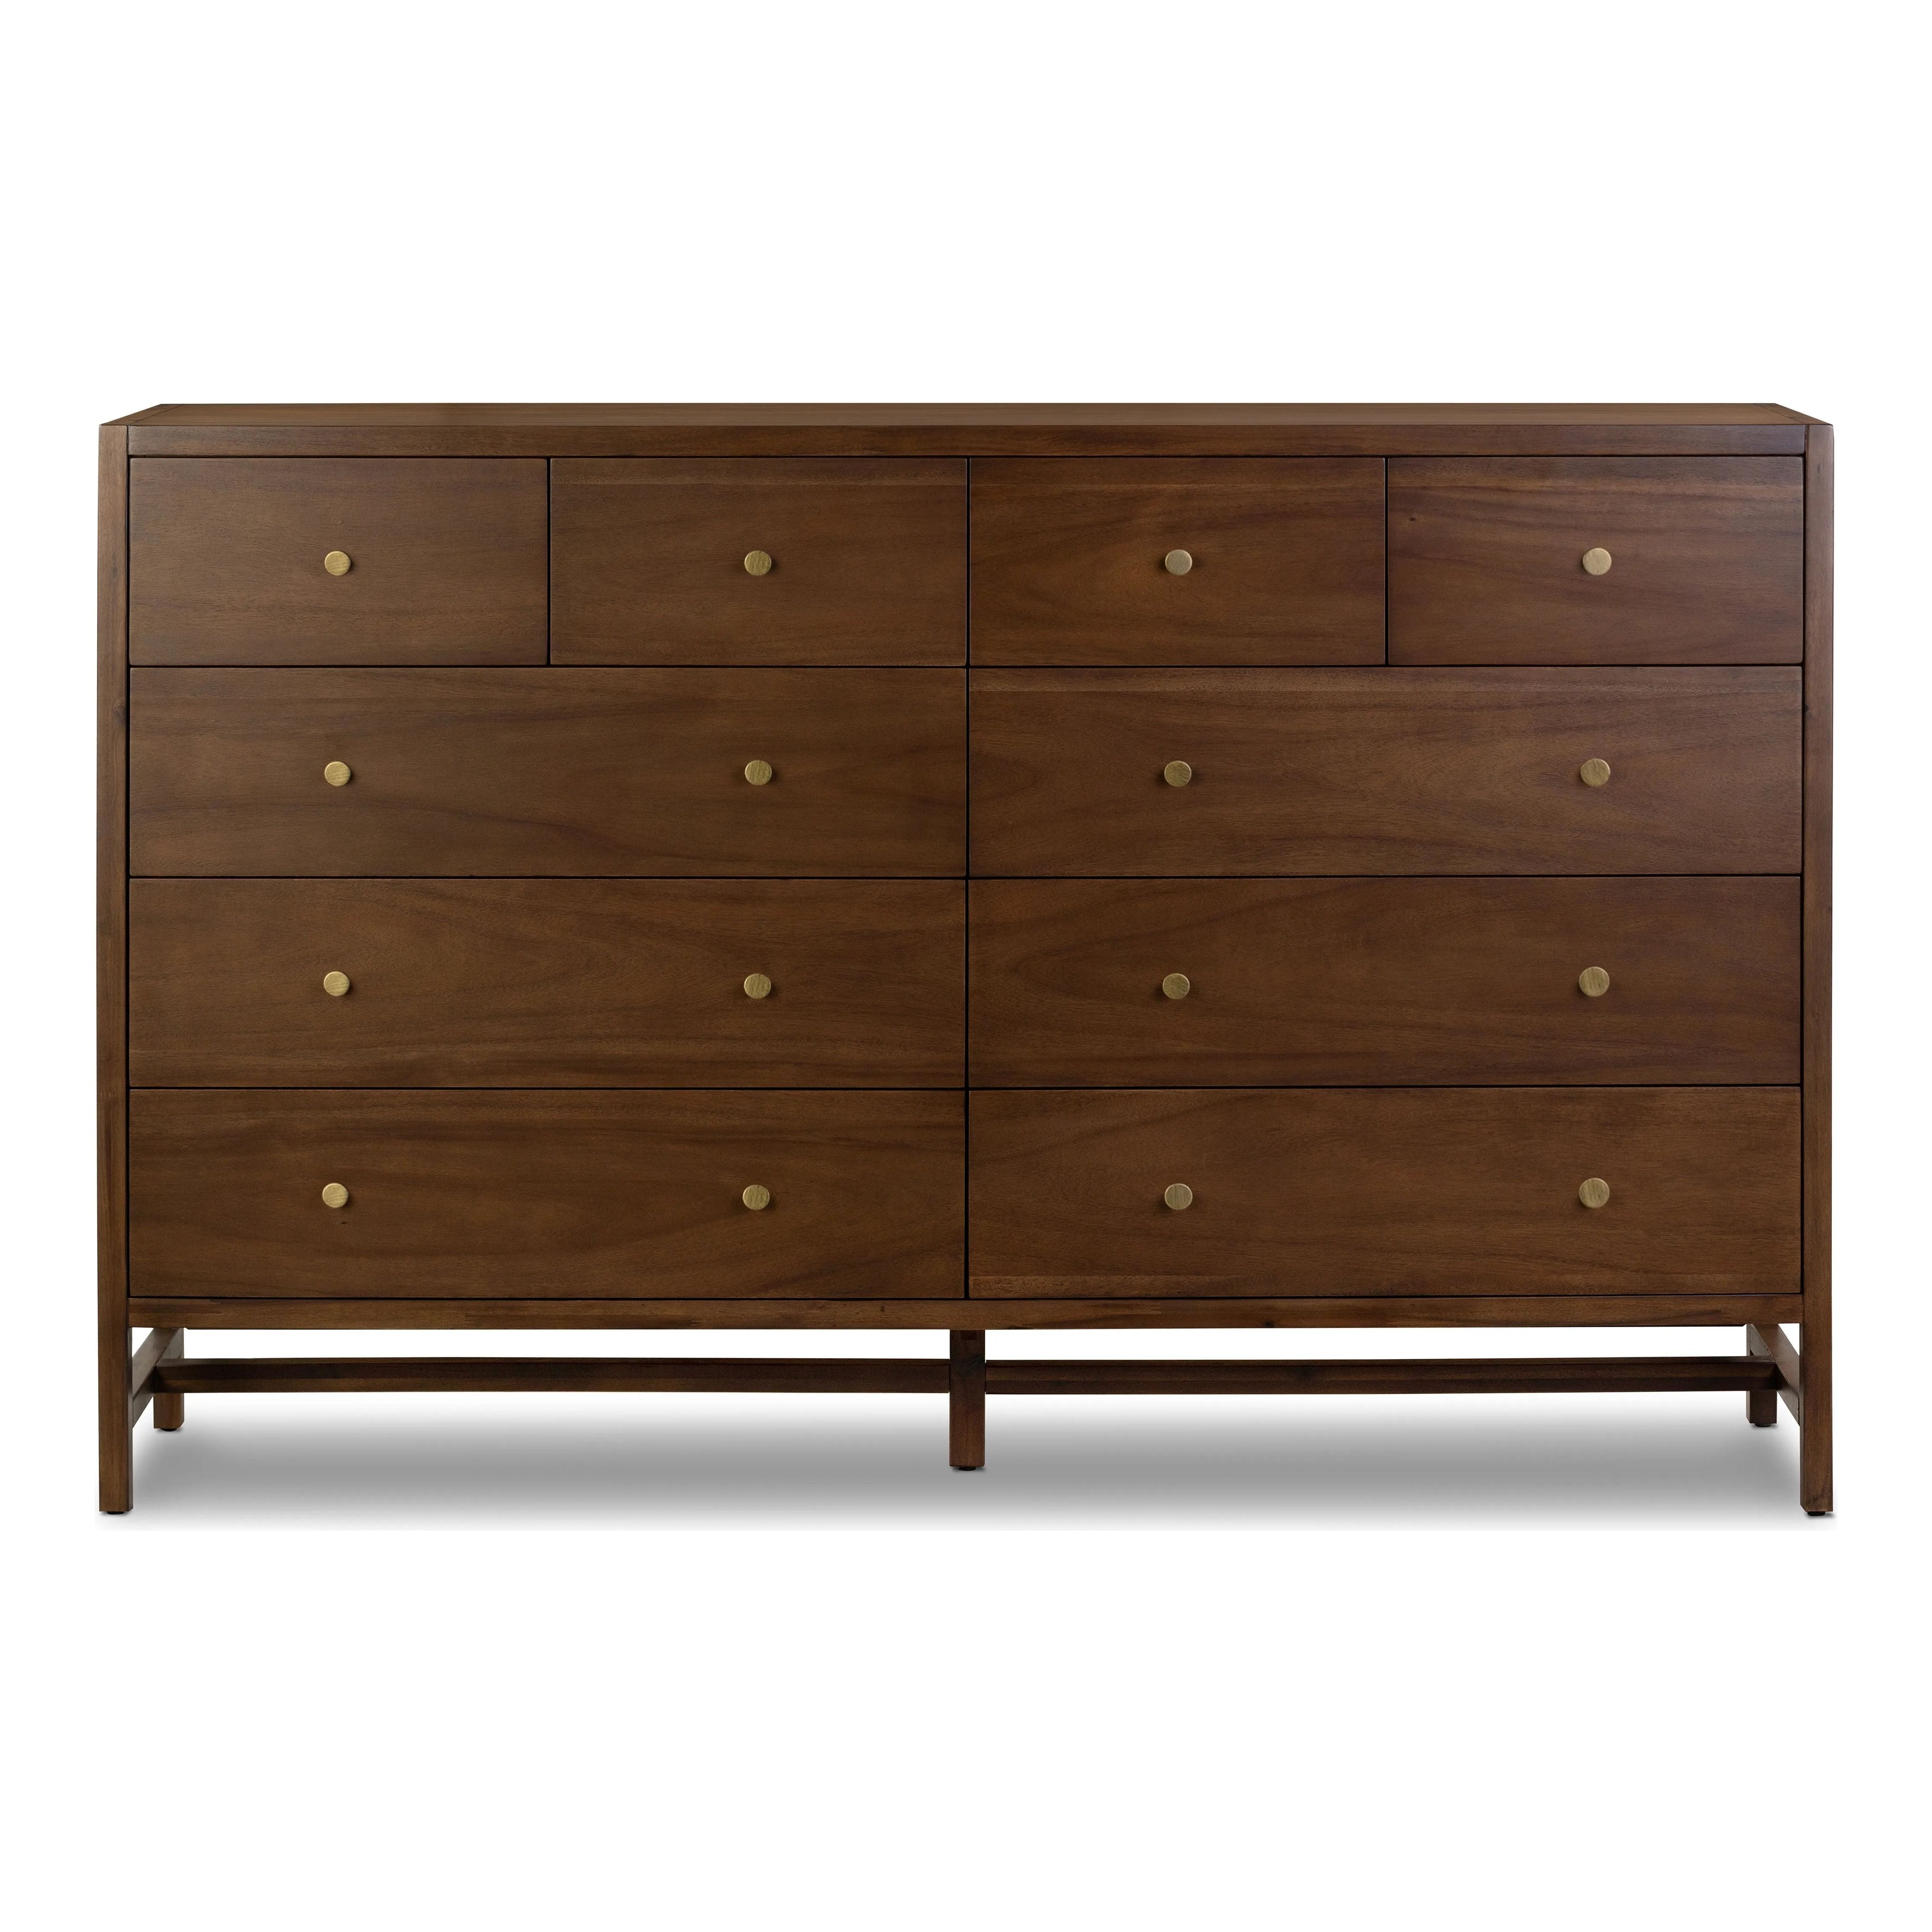 A simple, heavy wood Parsons-style dresser with 10 varied sized drawers for ample storage. Finished in solid ash with brass hardware Amethyst Home provides interior design, new home construction design consulting, vintage area rugs, and lighting in the Scottsdale metro area.